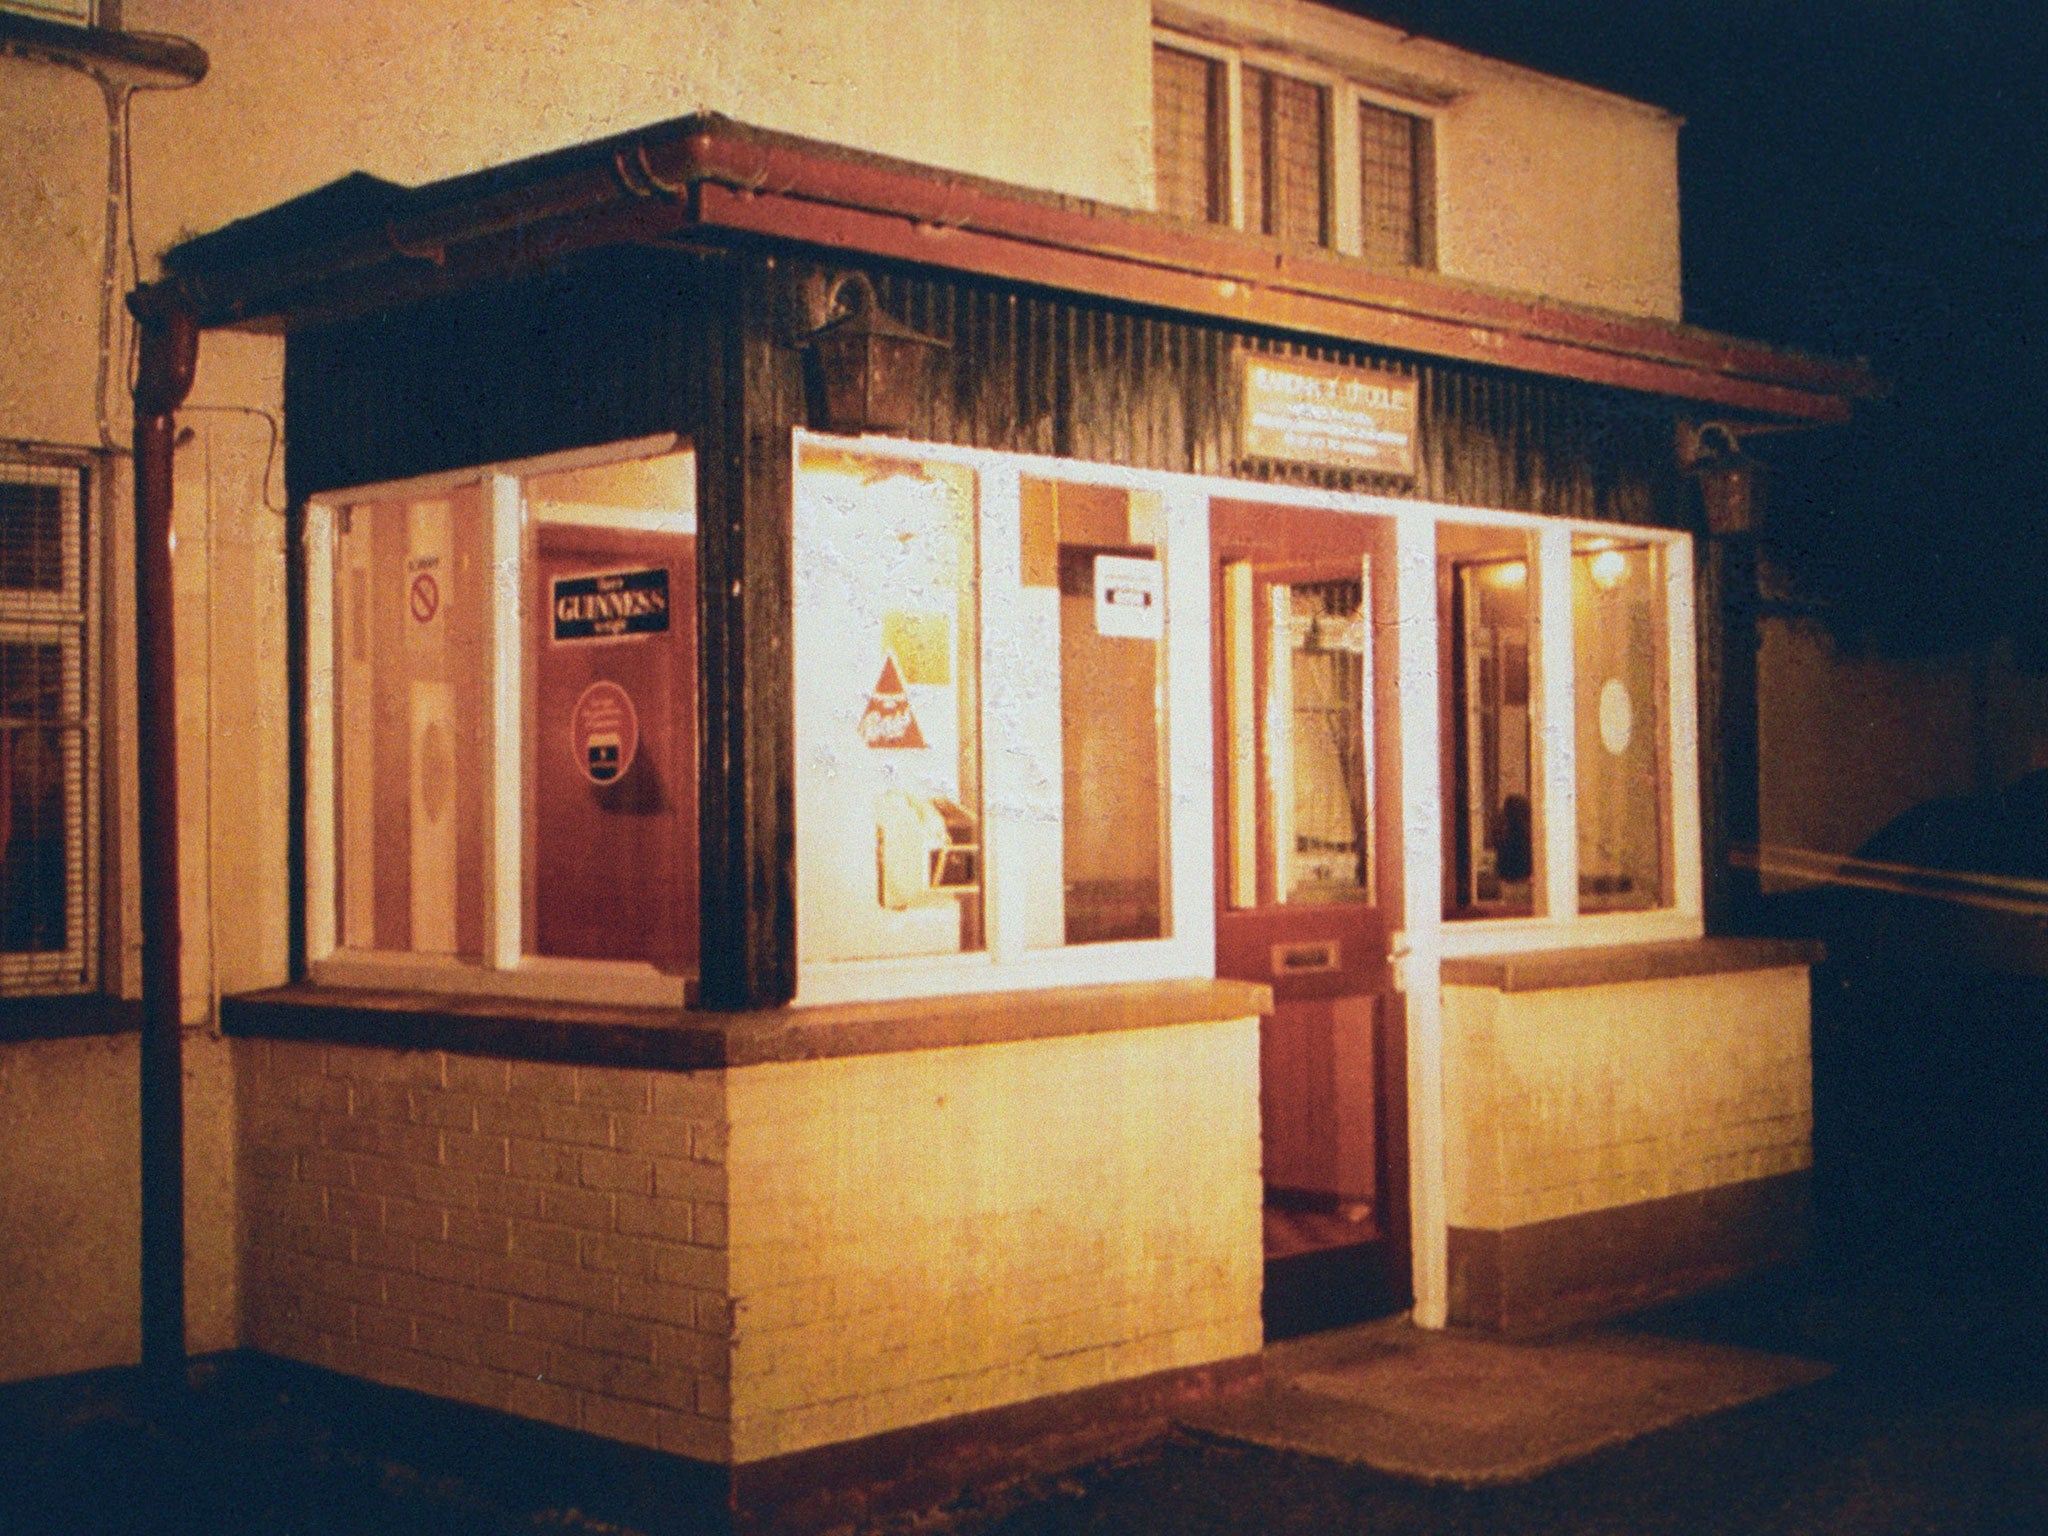 The Heights Bar in Loughinisland, County Down, where six Catholic men were murdered while watching football in 1994.